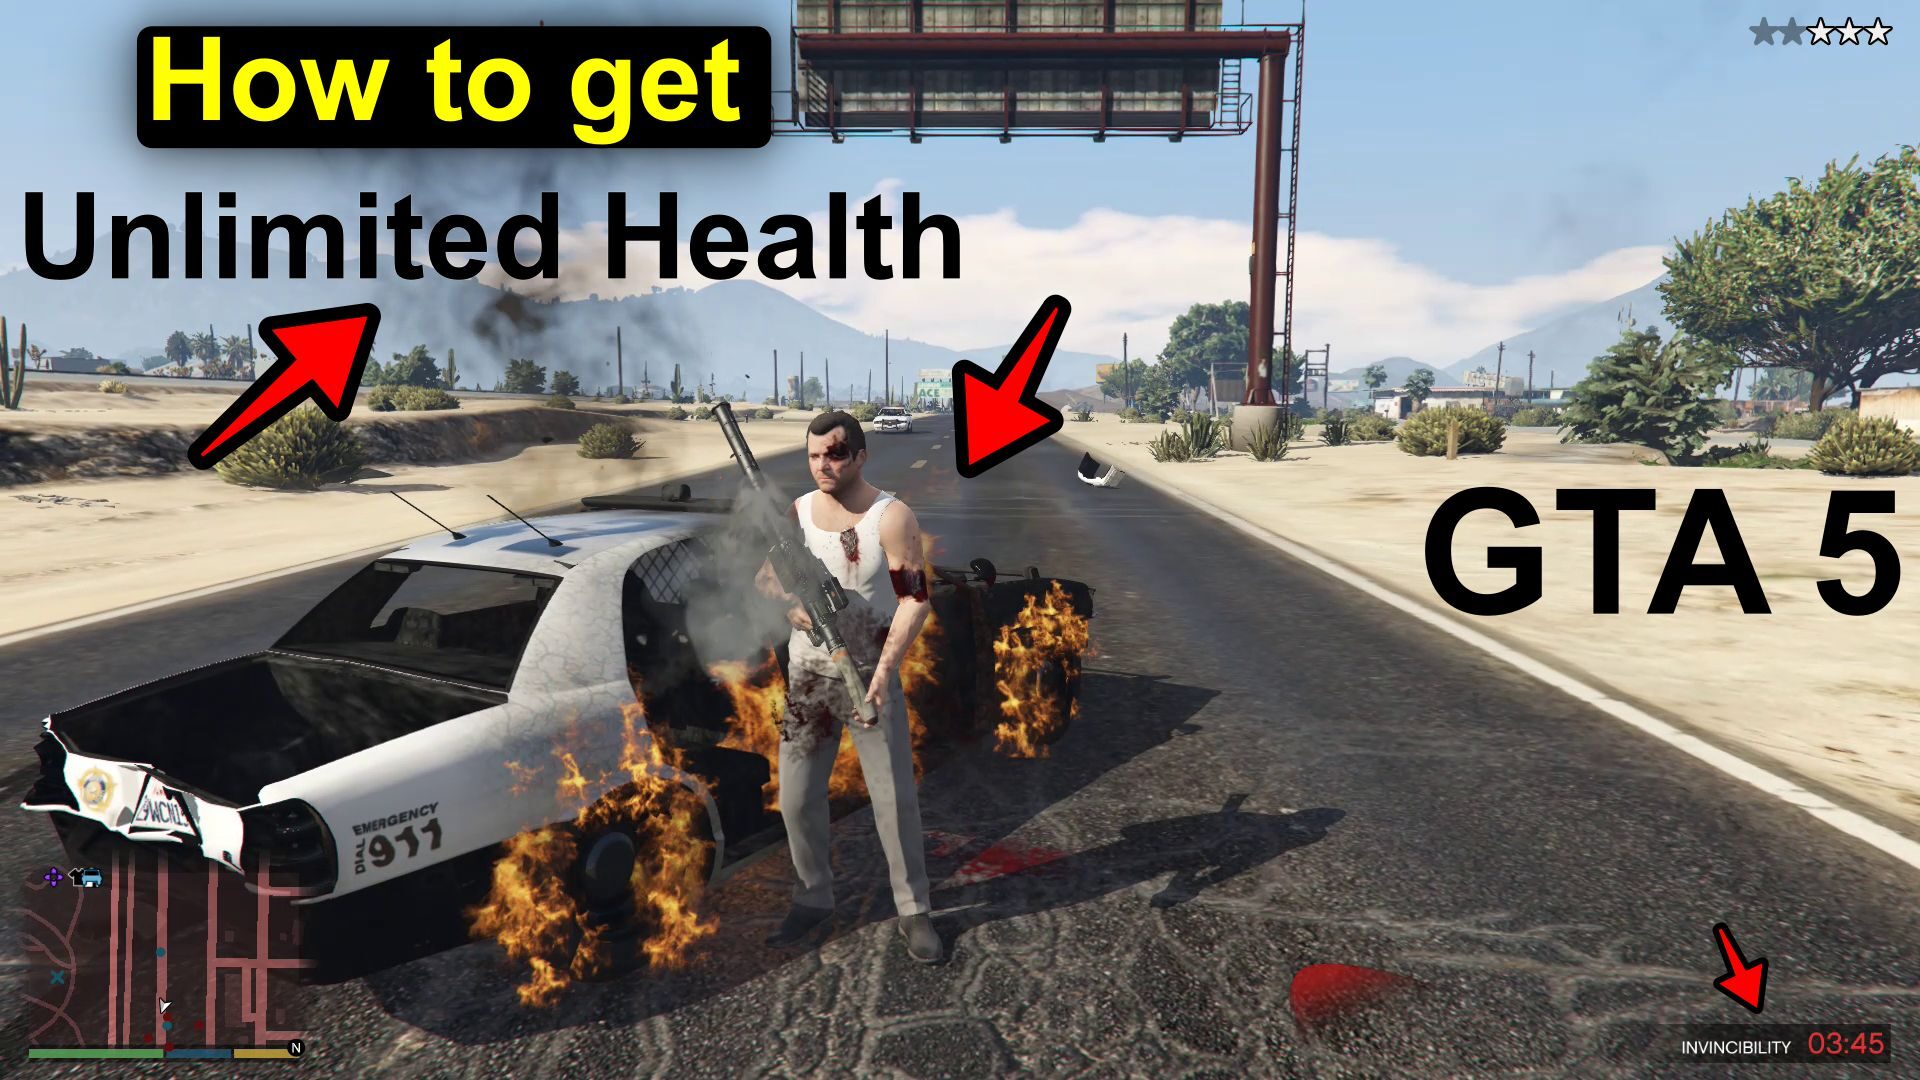 how to get unlimited health in GTA 5 - All Simple ways